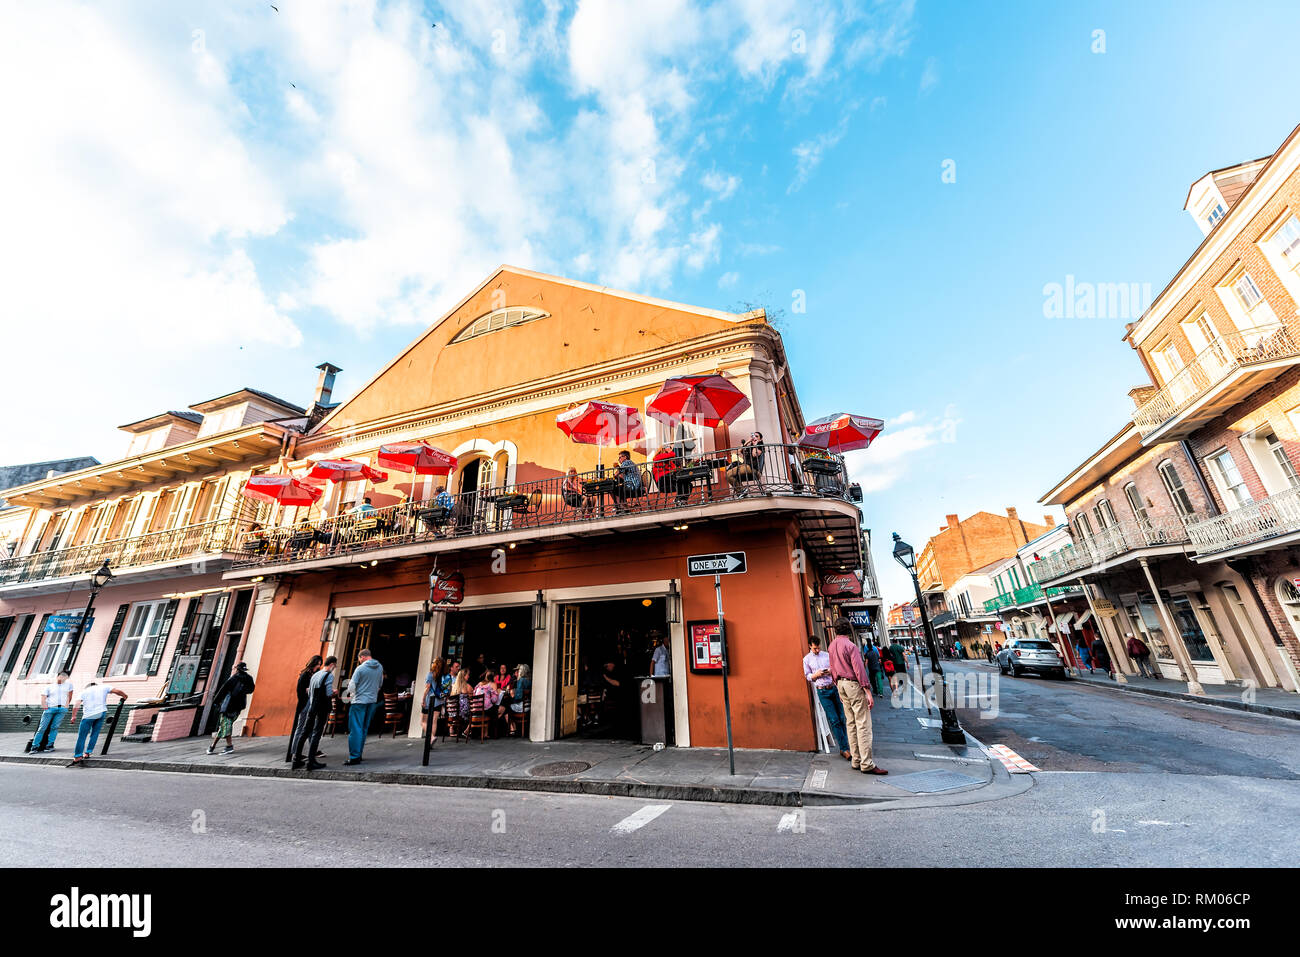 New Orleans, USA - April 23, 2018: Old town Chartres street in Louisiana famous city shops in sunset evening day with cast iron balconies restaurant w Stock Photo